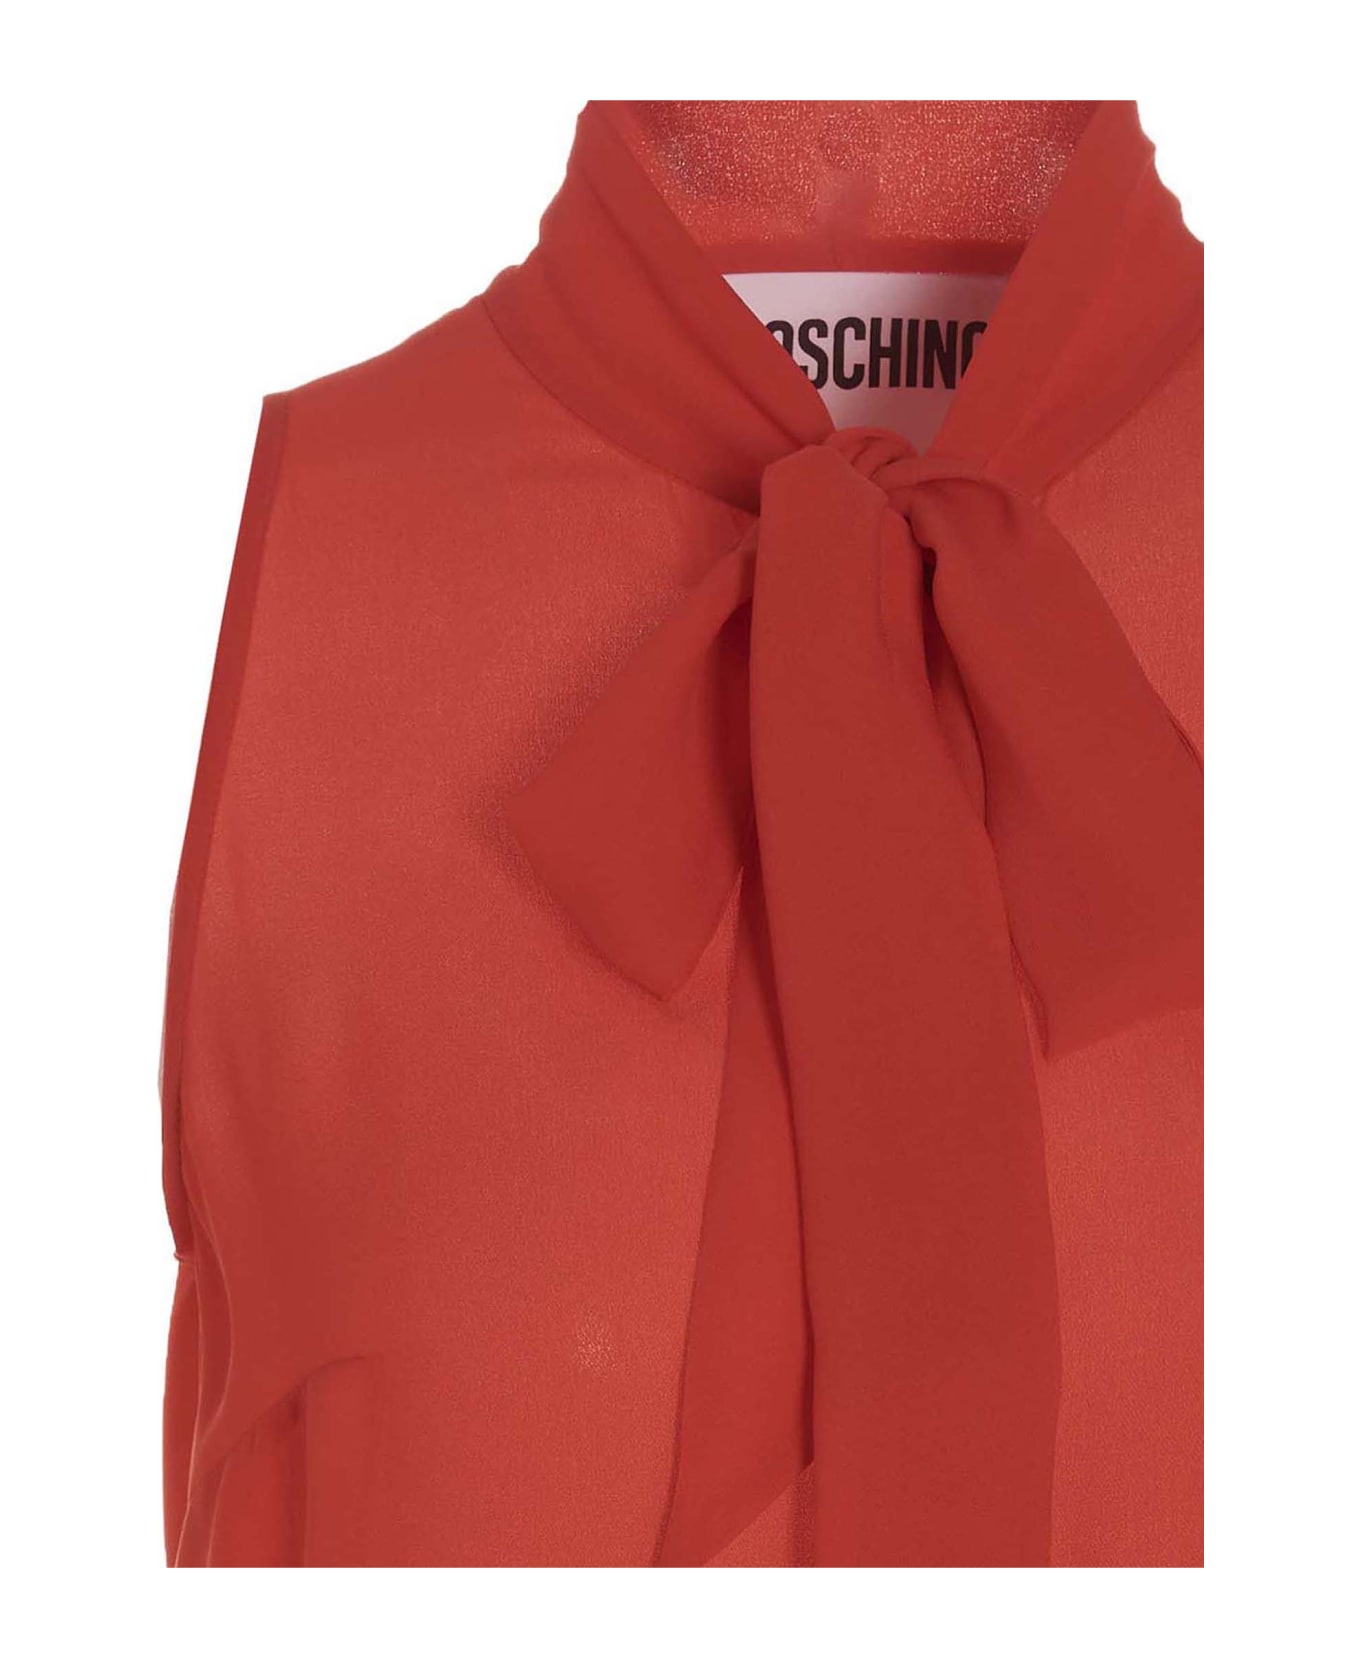 Moschino Pussy Bow Blouse - Red